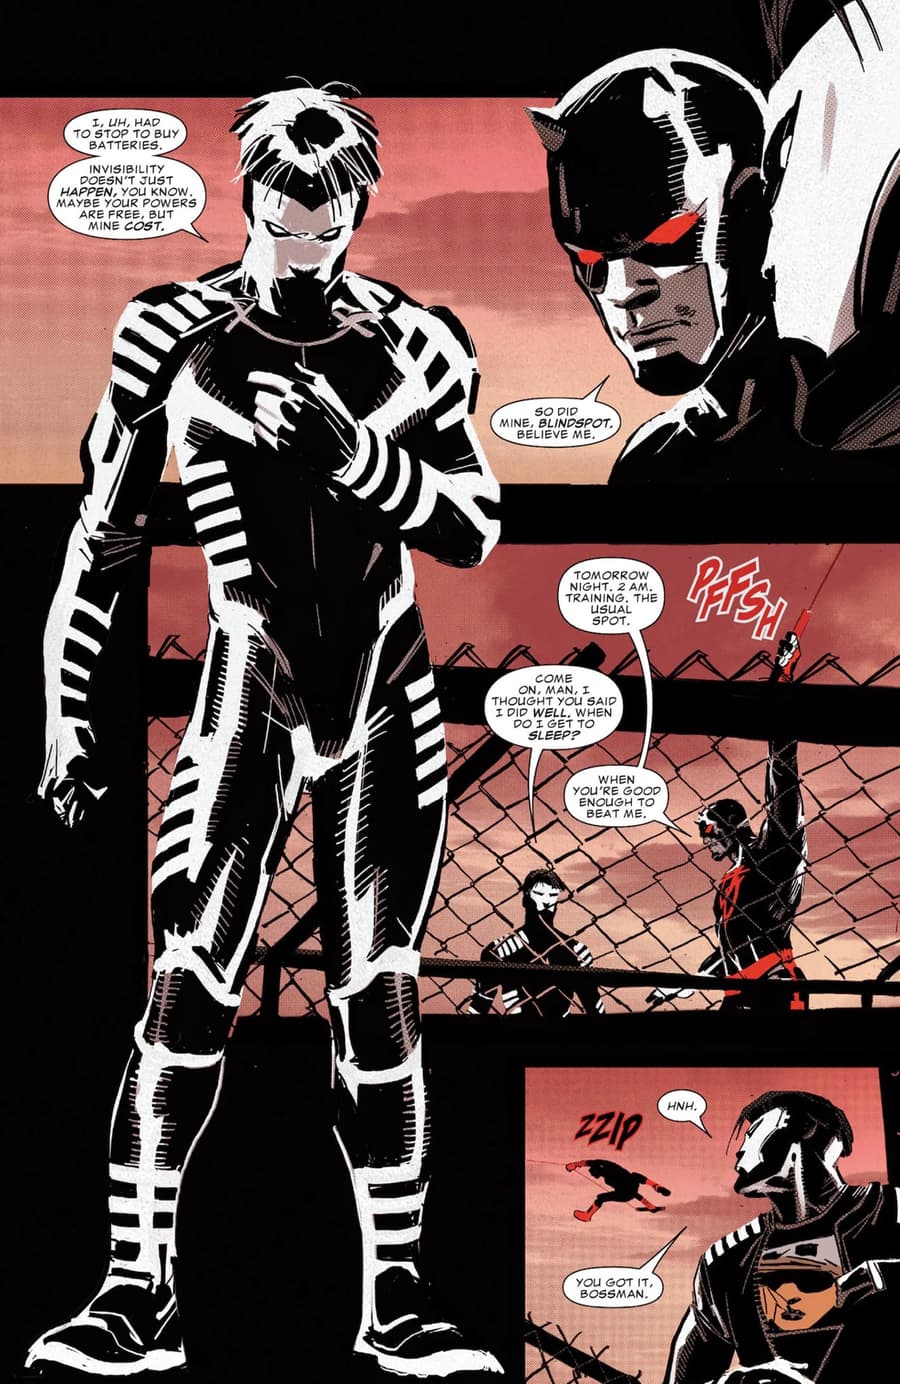 DAREDEVIL (2015) #1 page by Charles Soule and Ron Garney